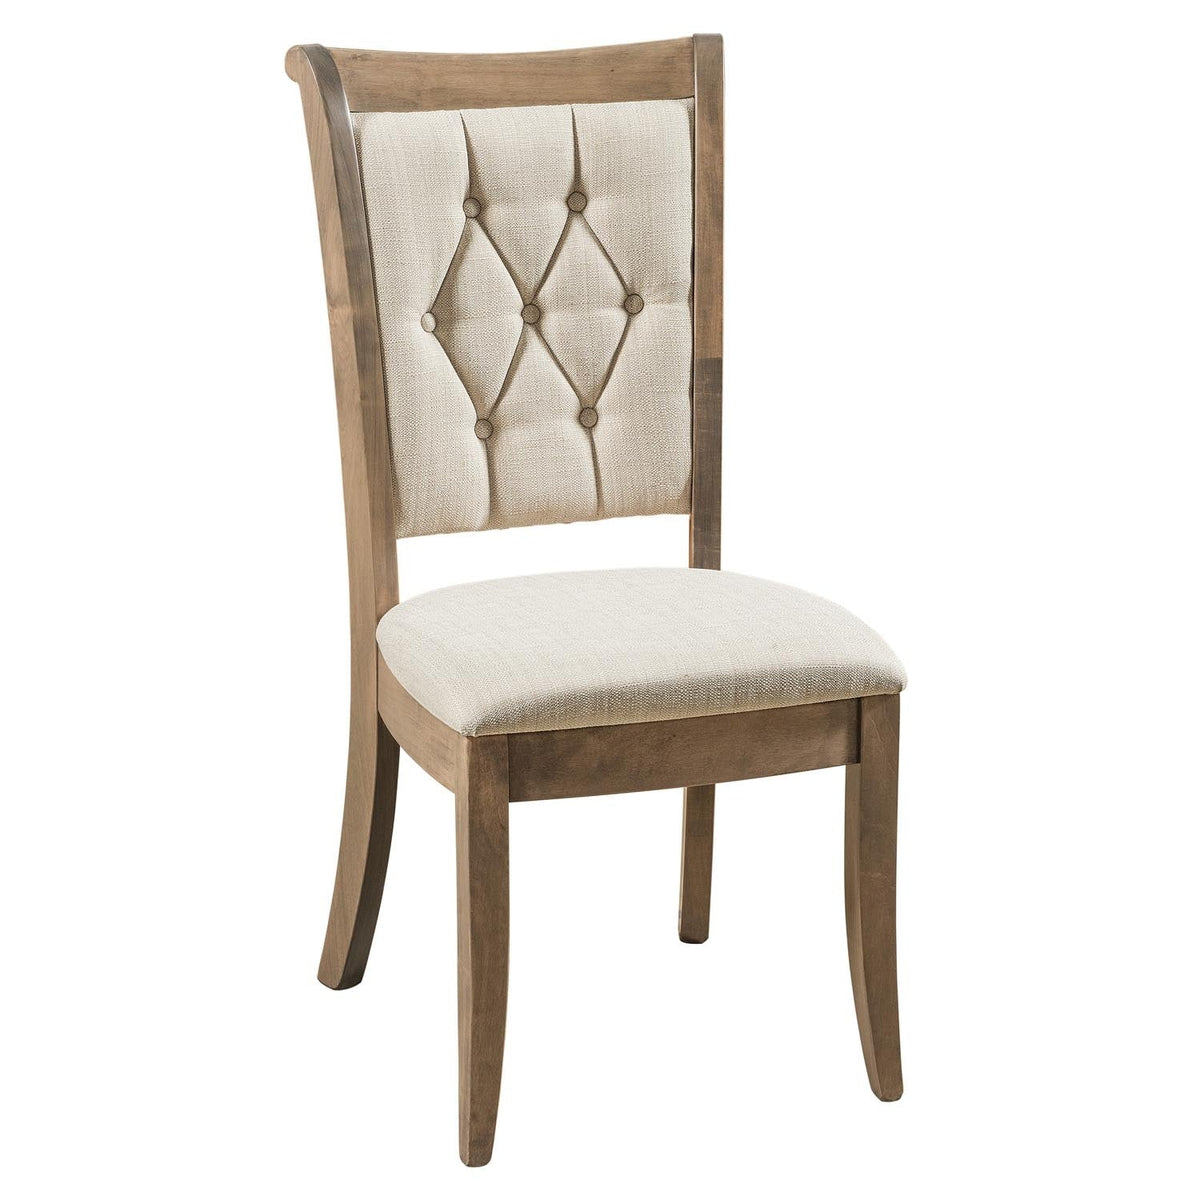 Chelsea Chair - snyders.furniture